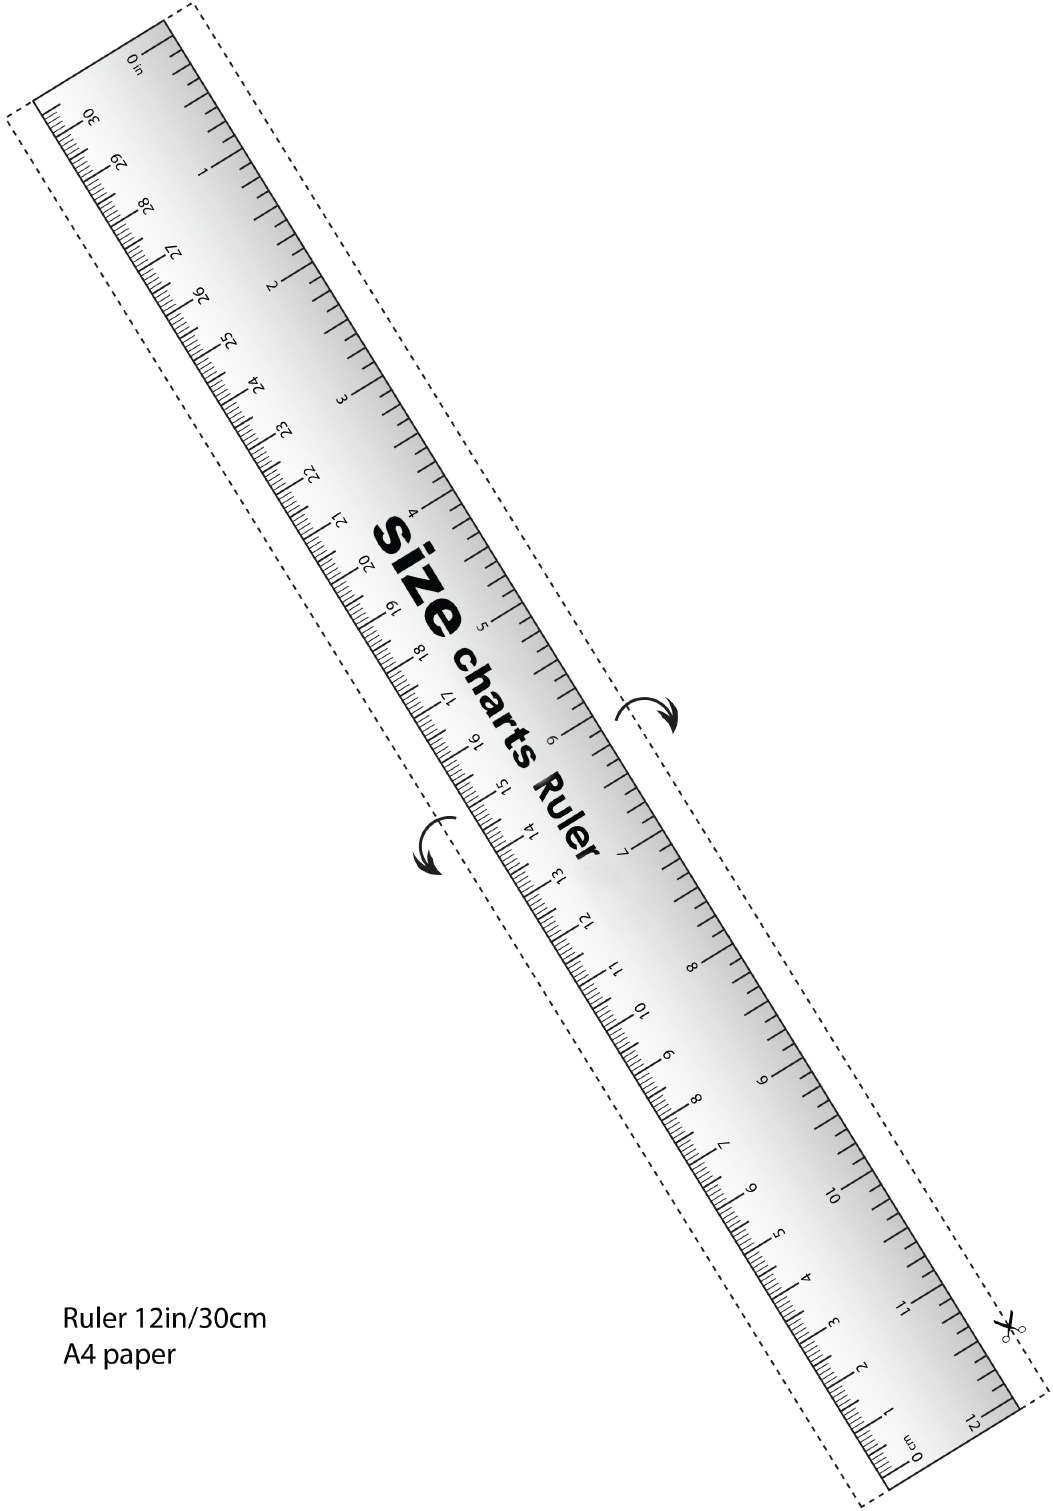 Printable ruler in inches with free download and tips - Size-Charts.com